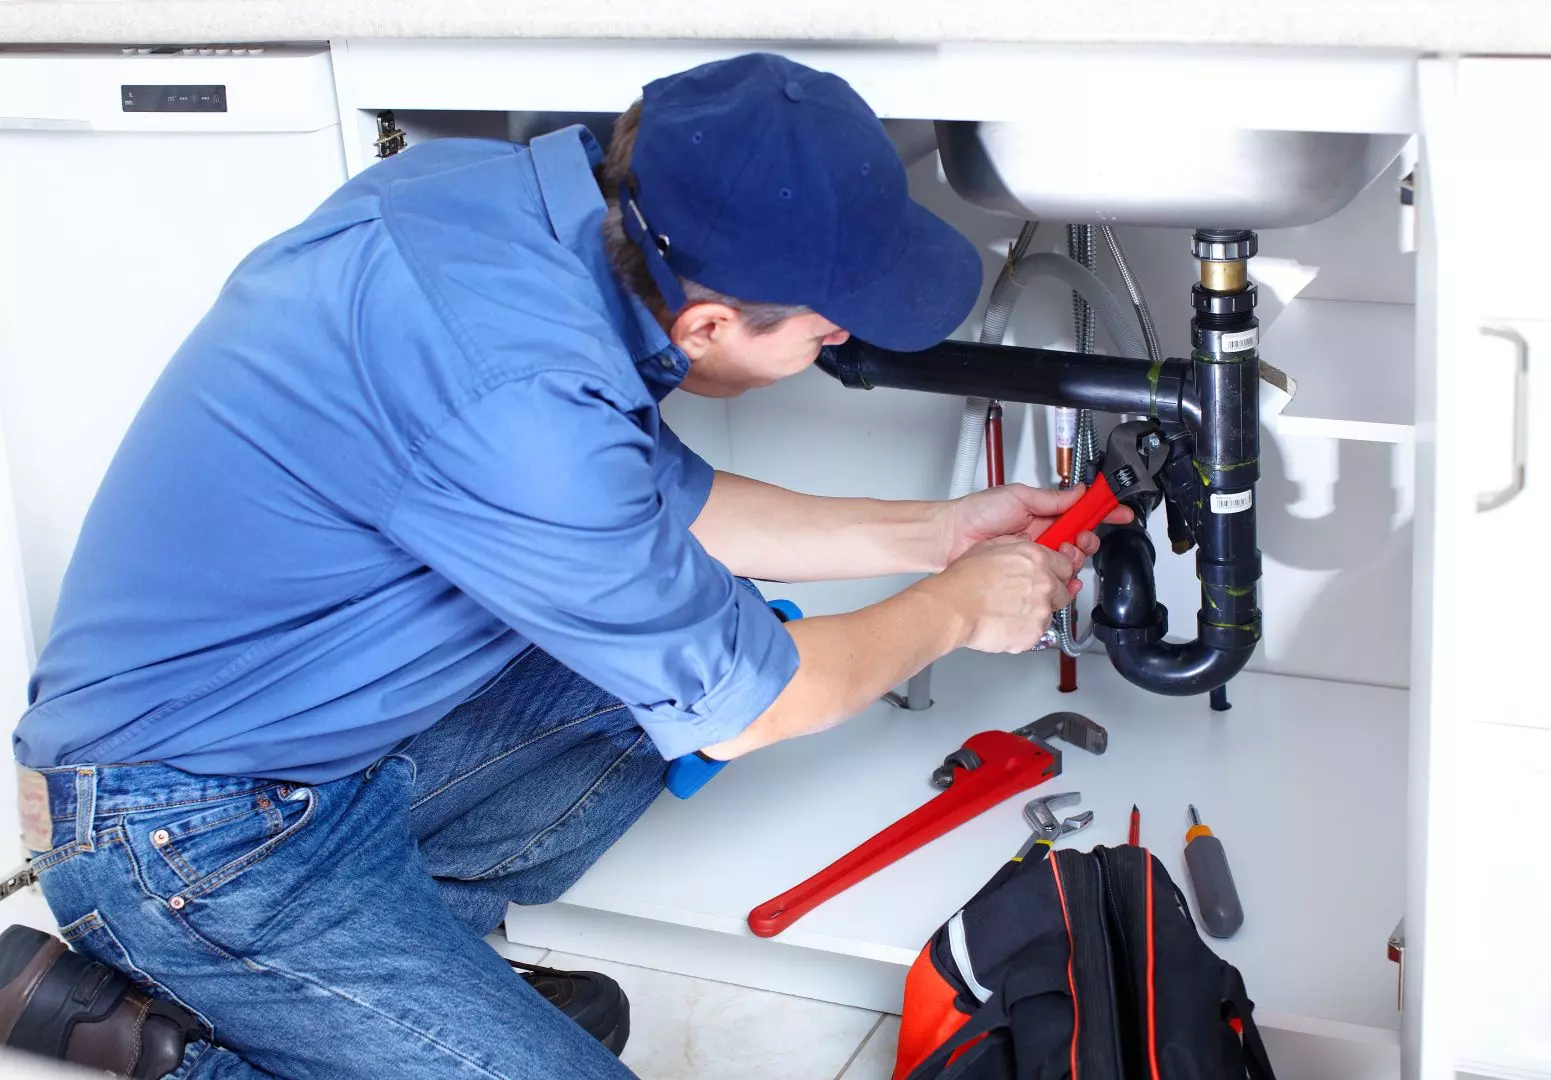 Domestic Plumber Services In Skegness, Lincolnshire